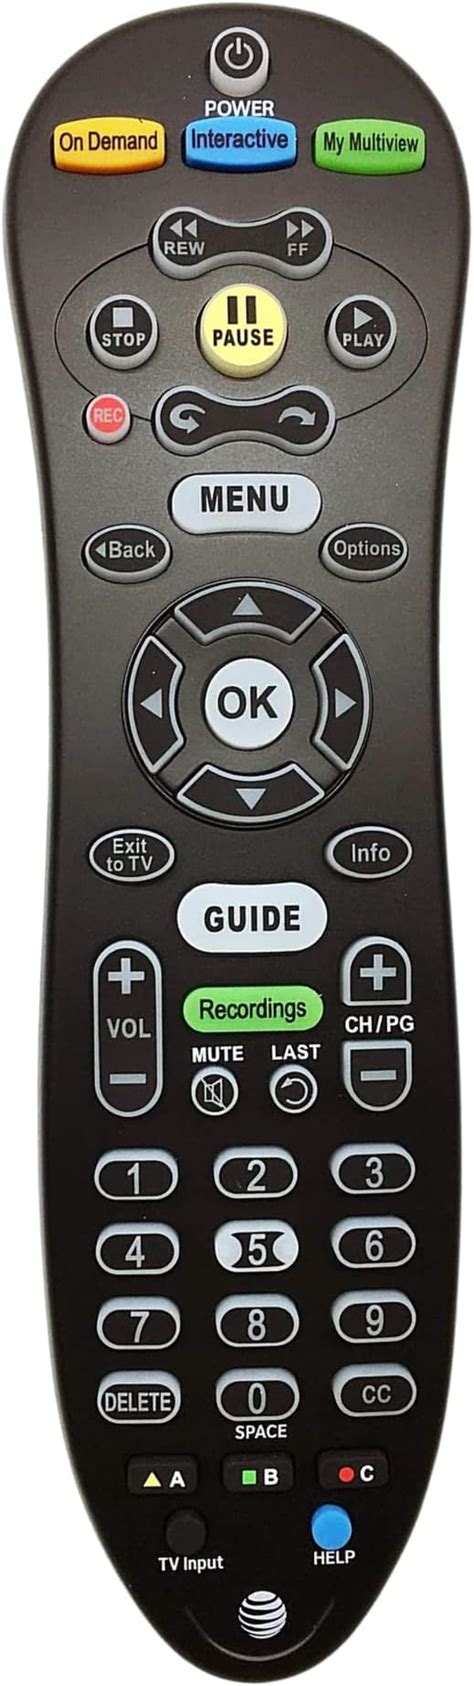 Program uverse remote. From the U-verse TV remote control: Press Menu . Select Help > Information. Select Troubleshoot & Resolve . Press OK. Select TV > Remote Control > Troubleshooting, then follow the prompts. Note: The S20 and S30 remote controls are completely identical in functionality. The only difference is all of the buttons on the S30 model are backlit. 